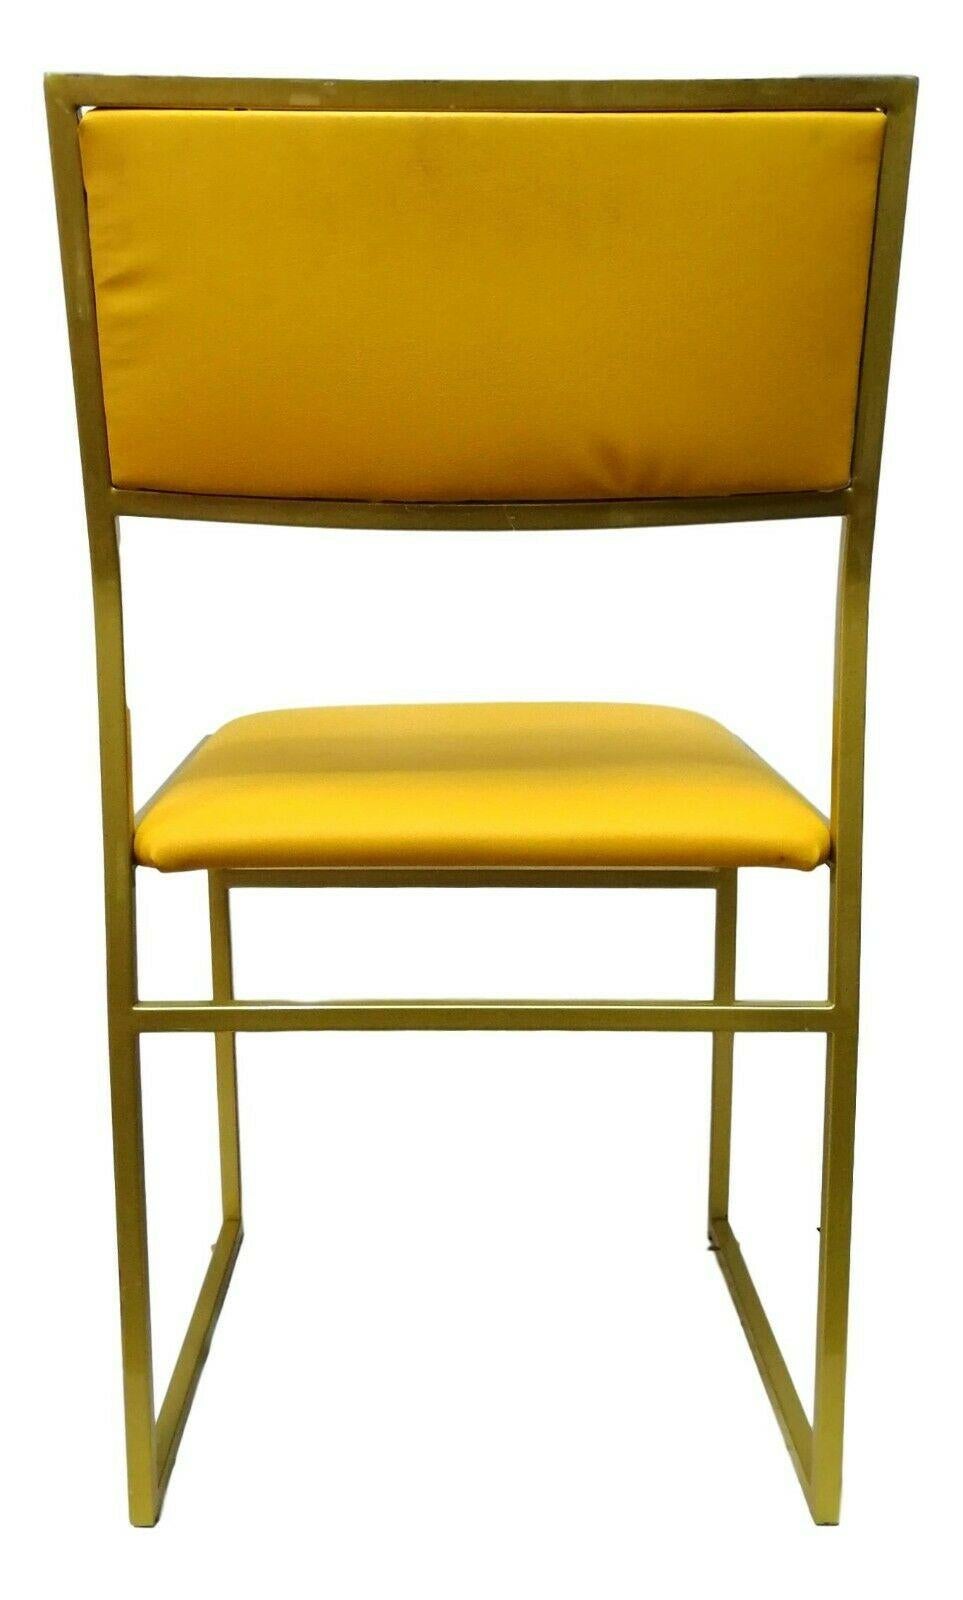 Original design chair from the 70s, made with a golden lacquered metal frame, seat and back upholstered in yellow skay or chintz

Measures 78 cm in height, 42 cm in width, 50 cm in depth and 45 cm in height of the seat from the ground in very good